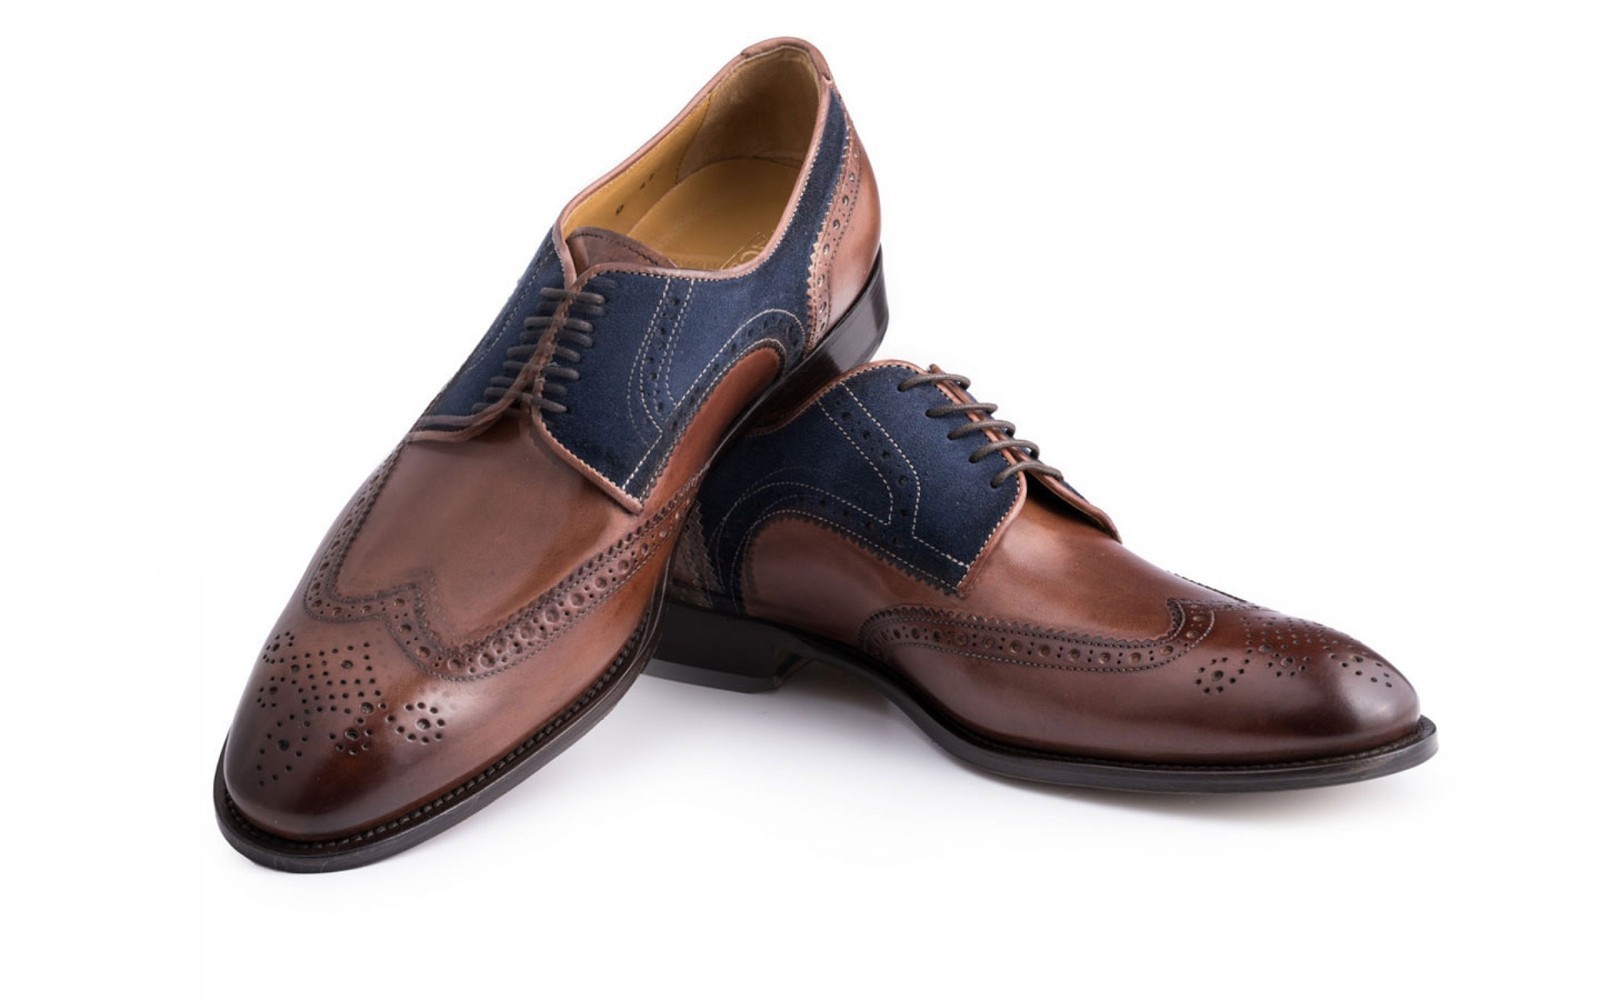 Two Tone Oxford Brown Blue Cont Premium Quality Brogue Toe Suede Leather Shoes